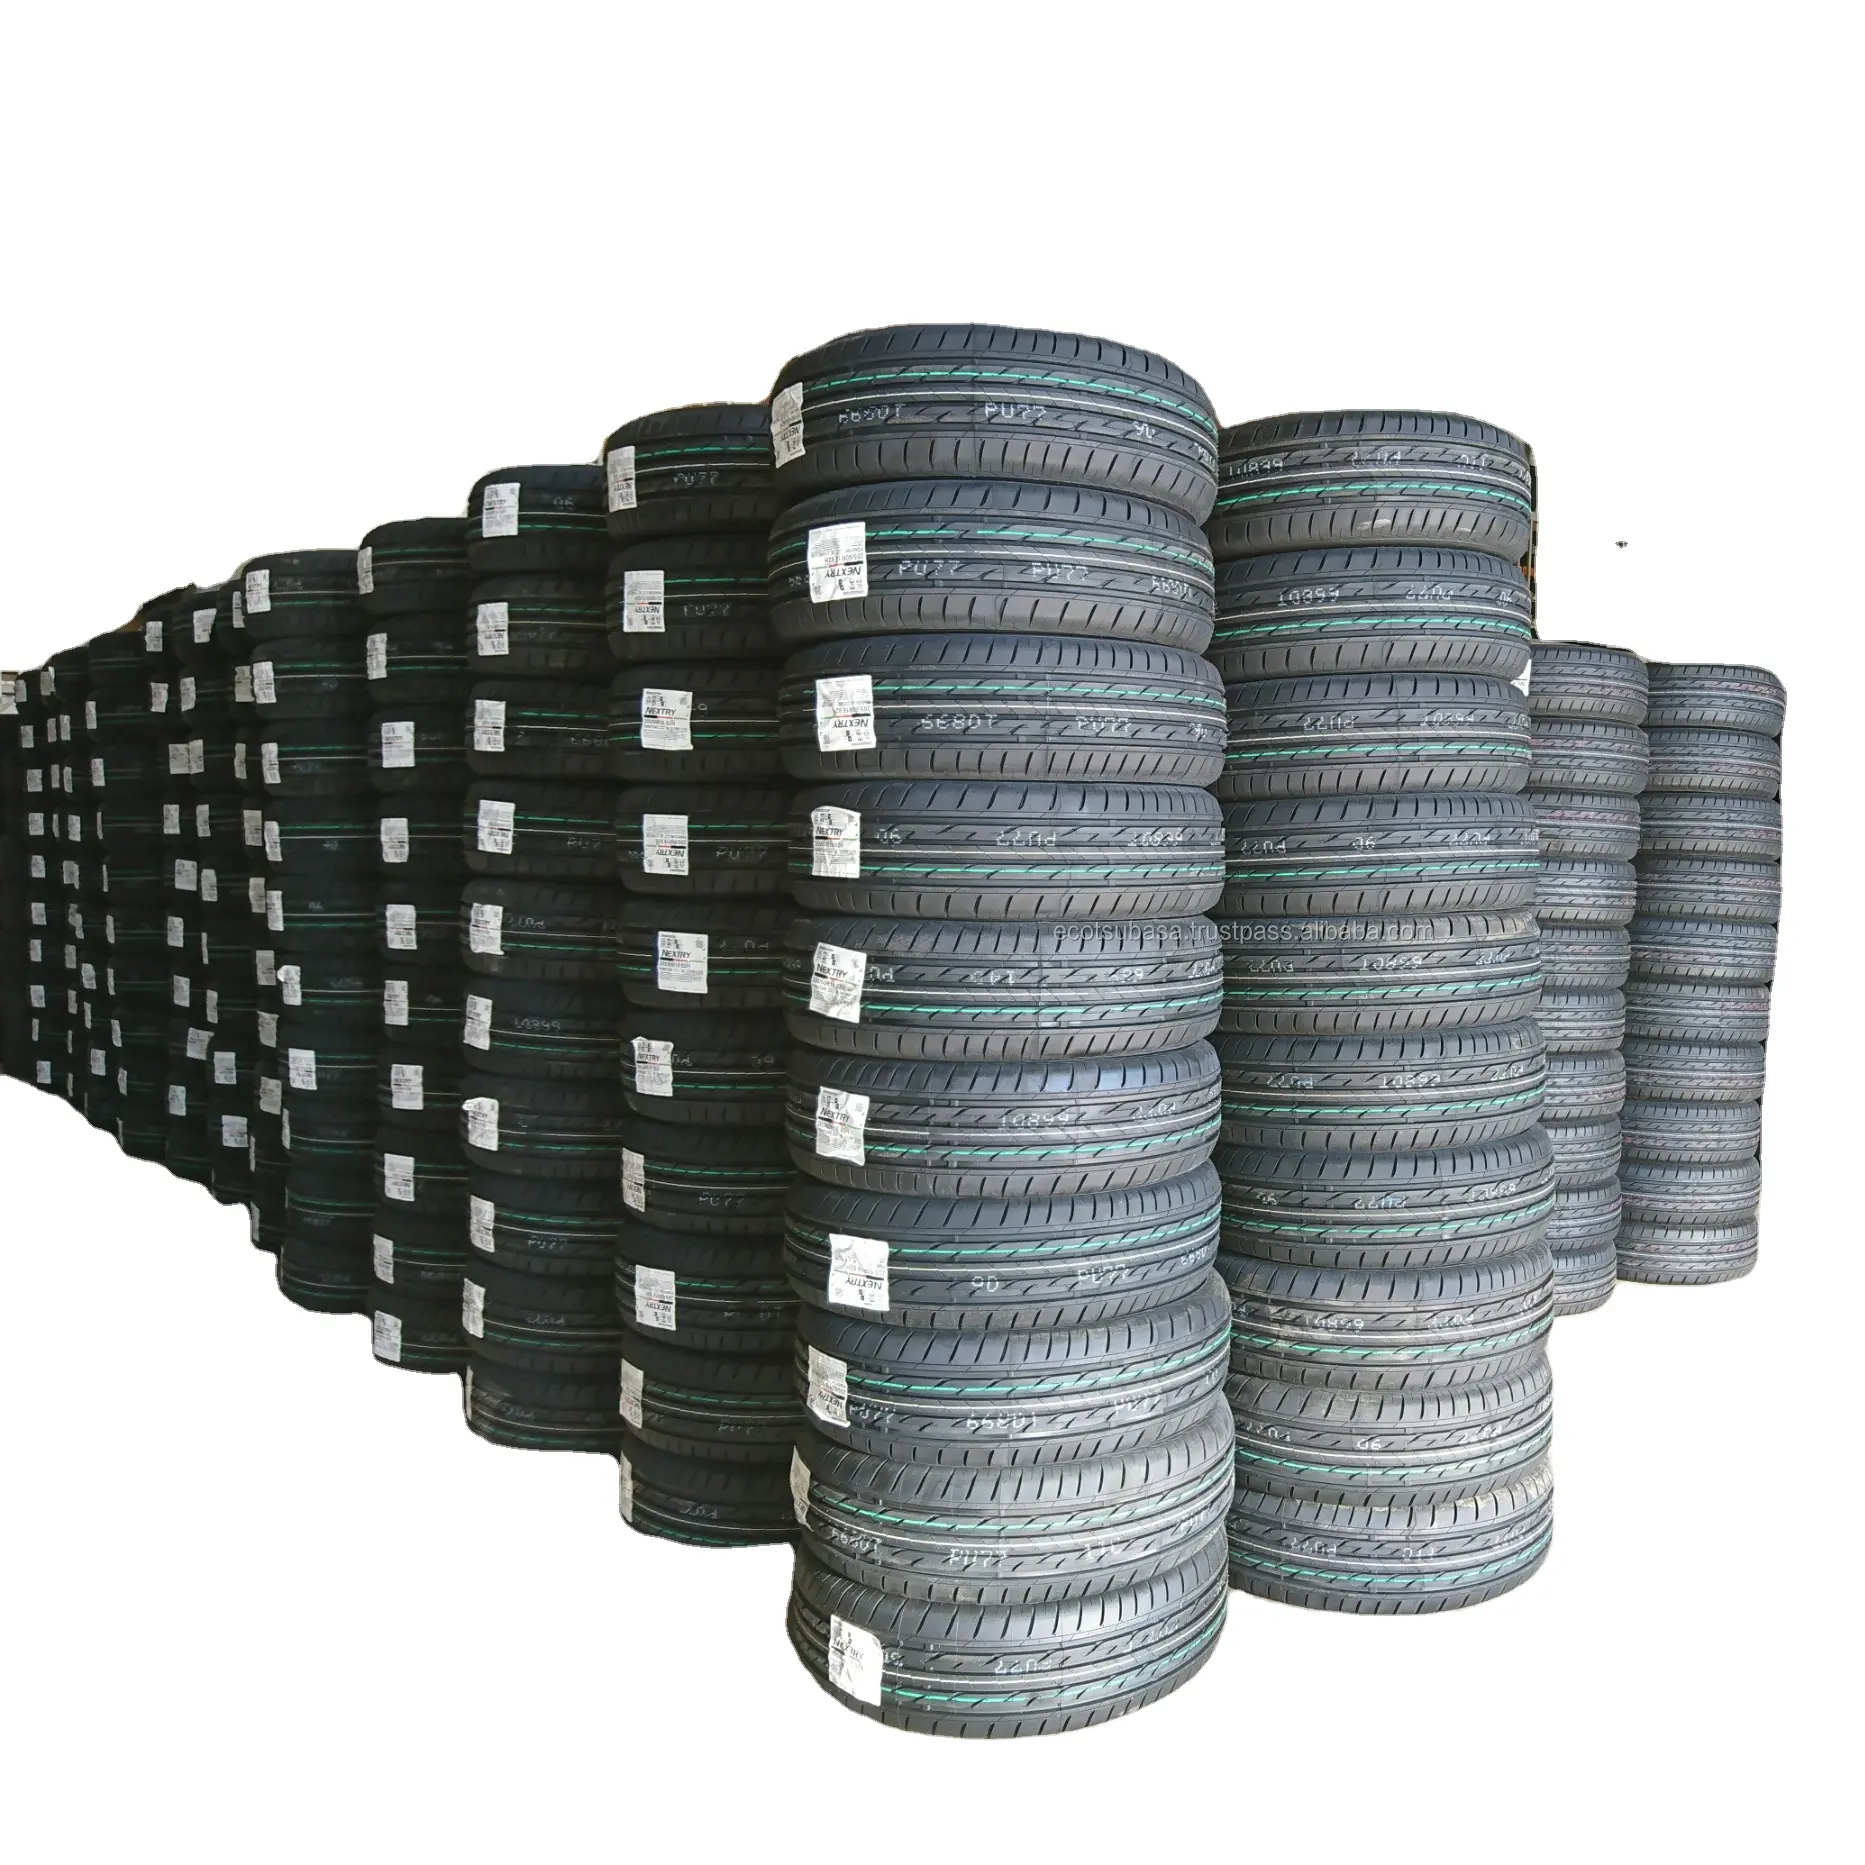 Hot Sales Used Car Tires In Bulk FOR SALE at Wholesale Price Cheap Car Tires for Worldwide Export!!!